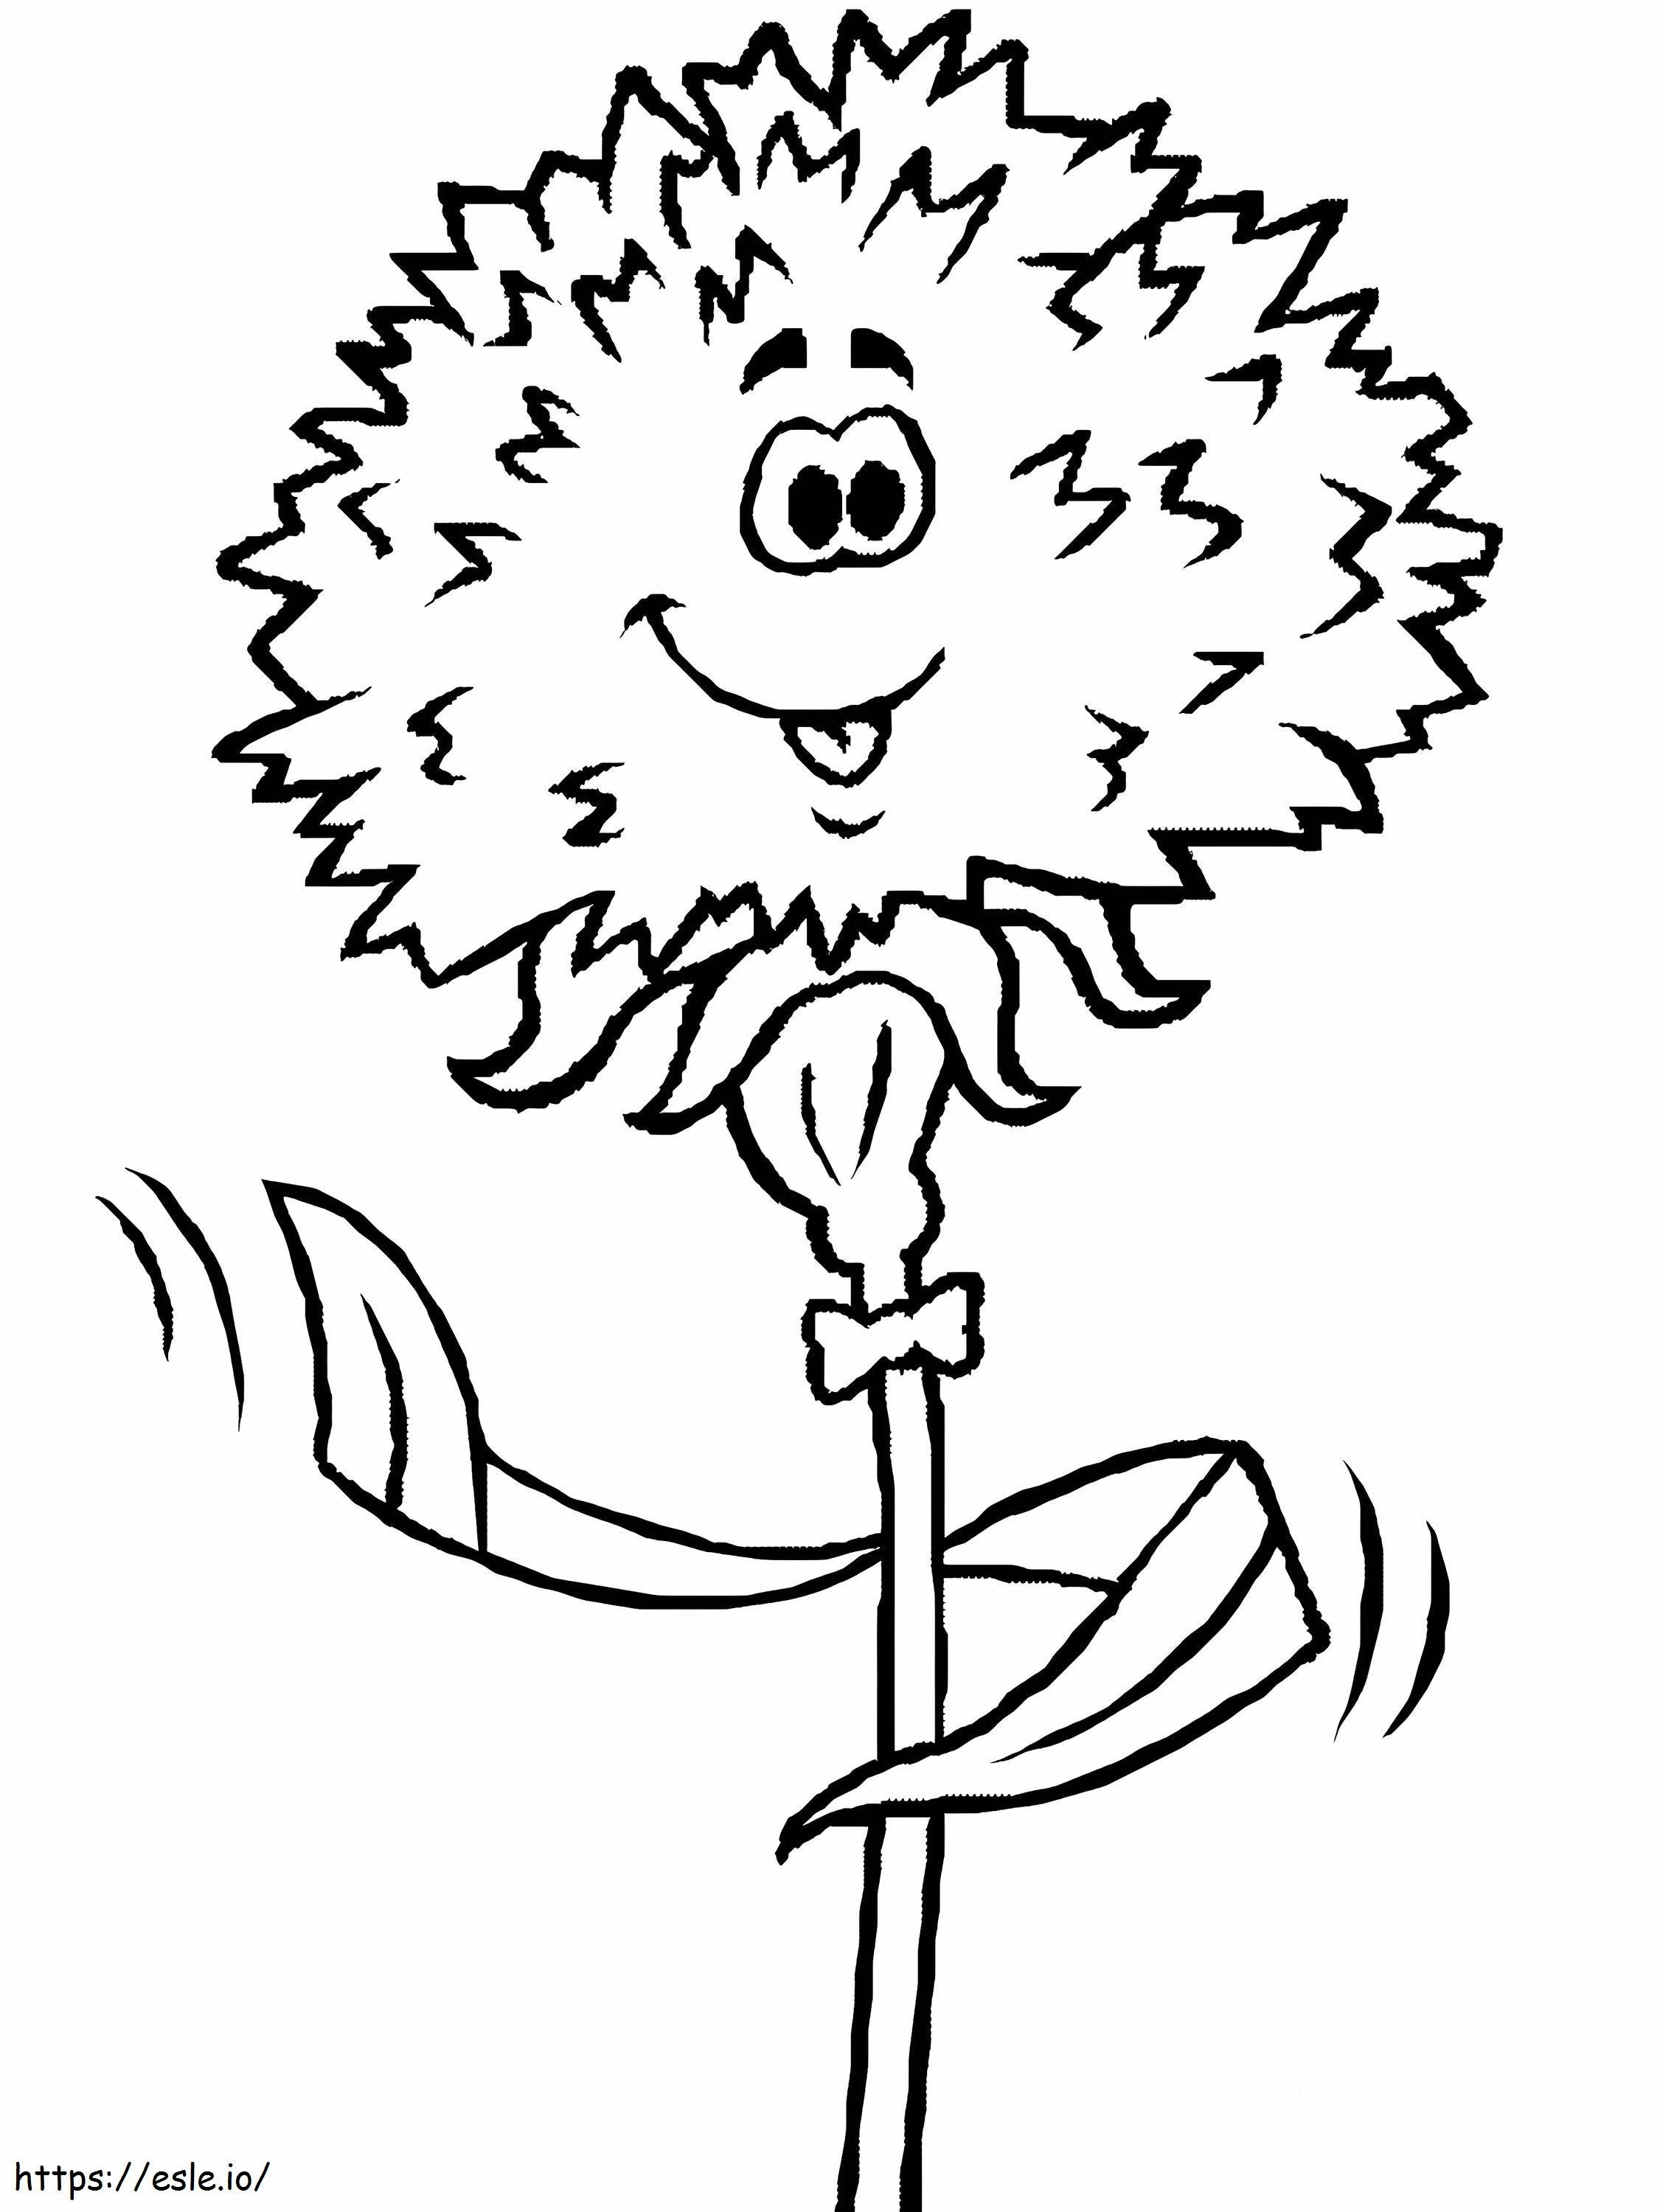 1528166601 Carnation2A4 coloring page